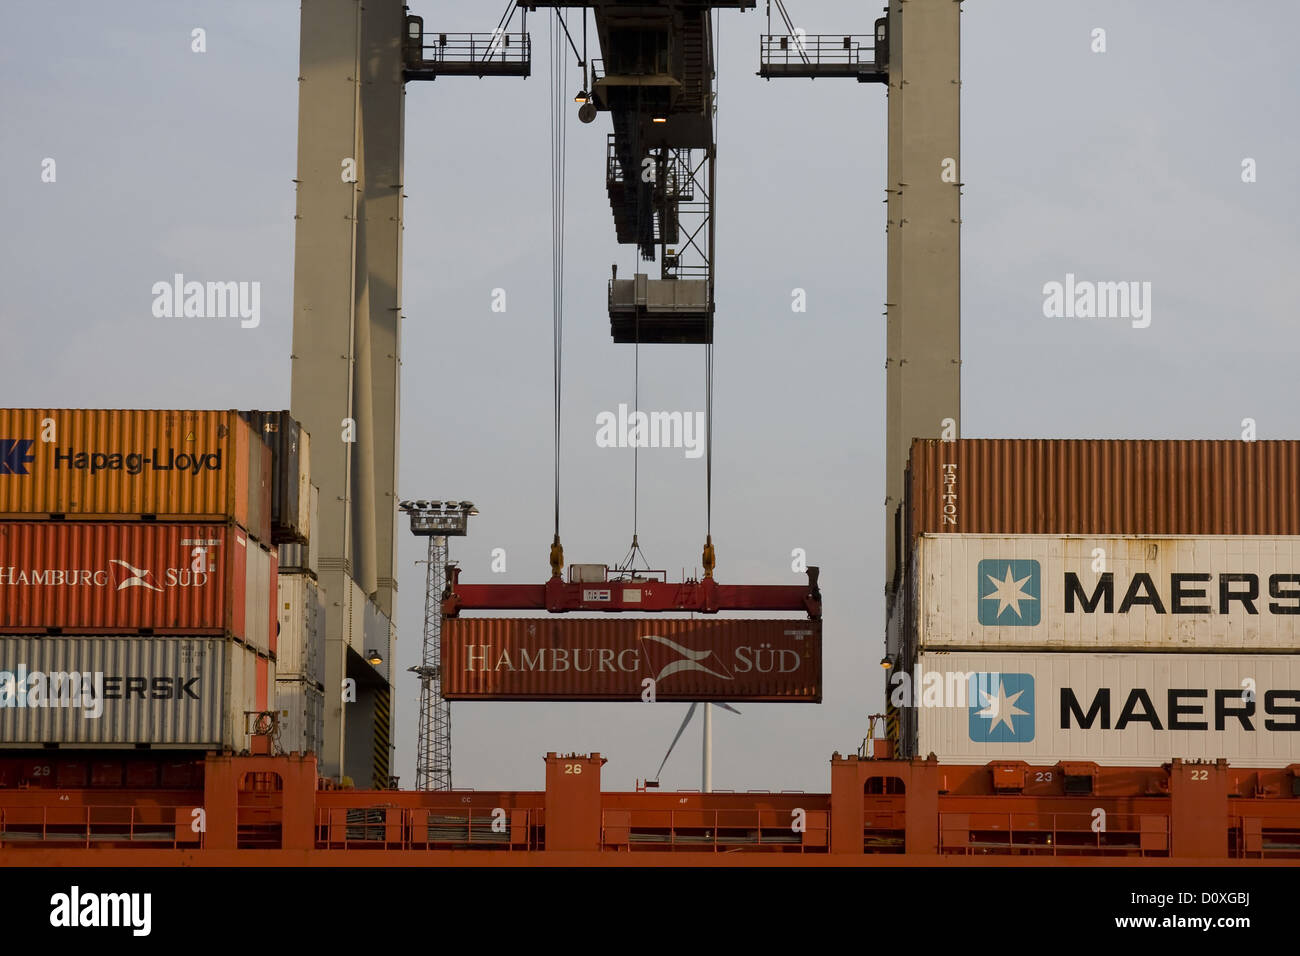 Burchardkai, business, container, container port, container terminal, container terminals, loading, Germany, outside, one, Hambu Stock Photo